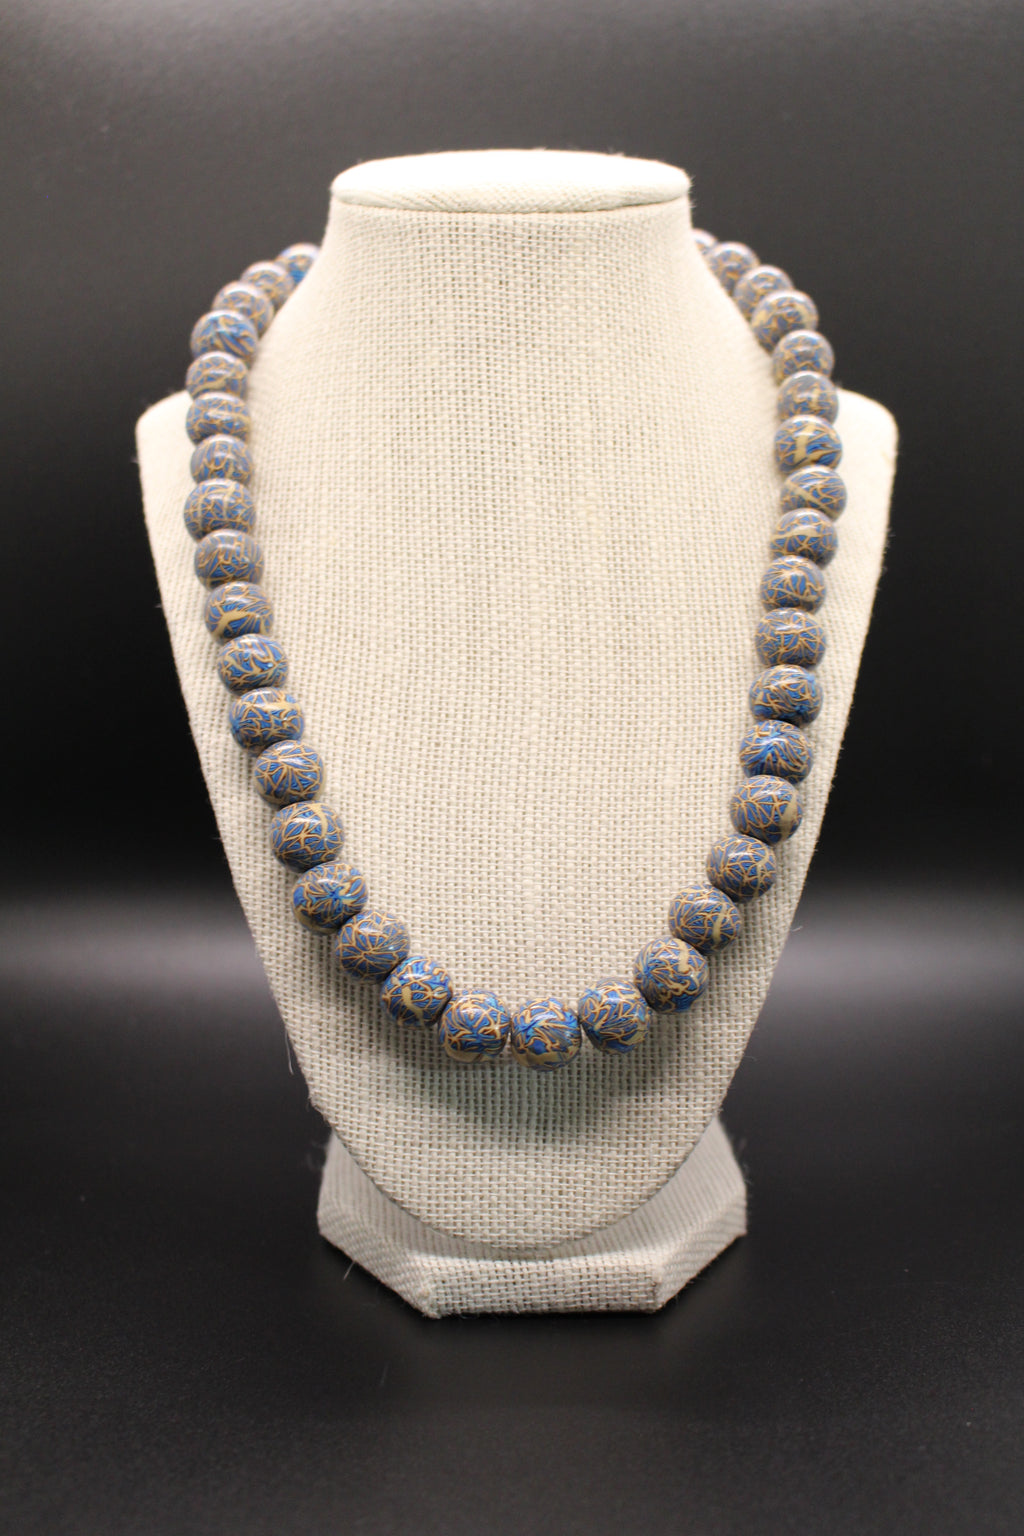 KD-SS001 "Lotus" Pale Blue Hand-Rolled, 22 Inch Gender Neutral Necklace